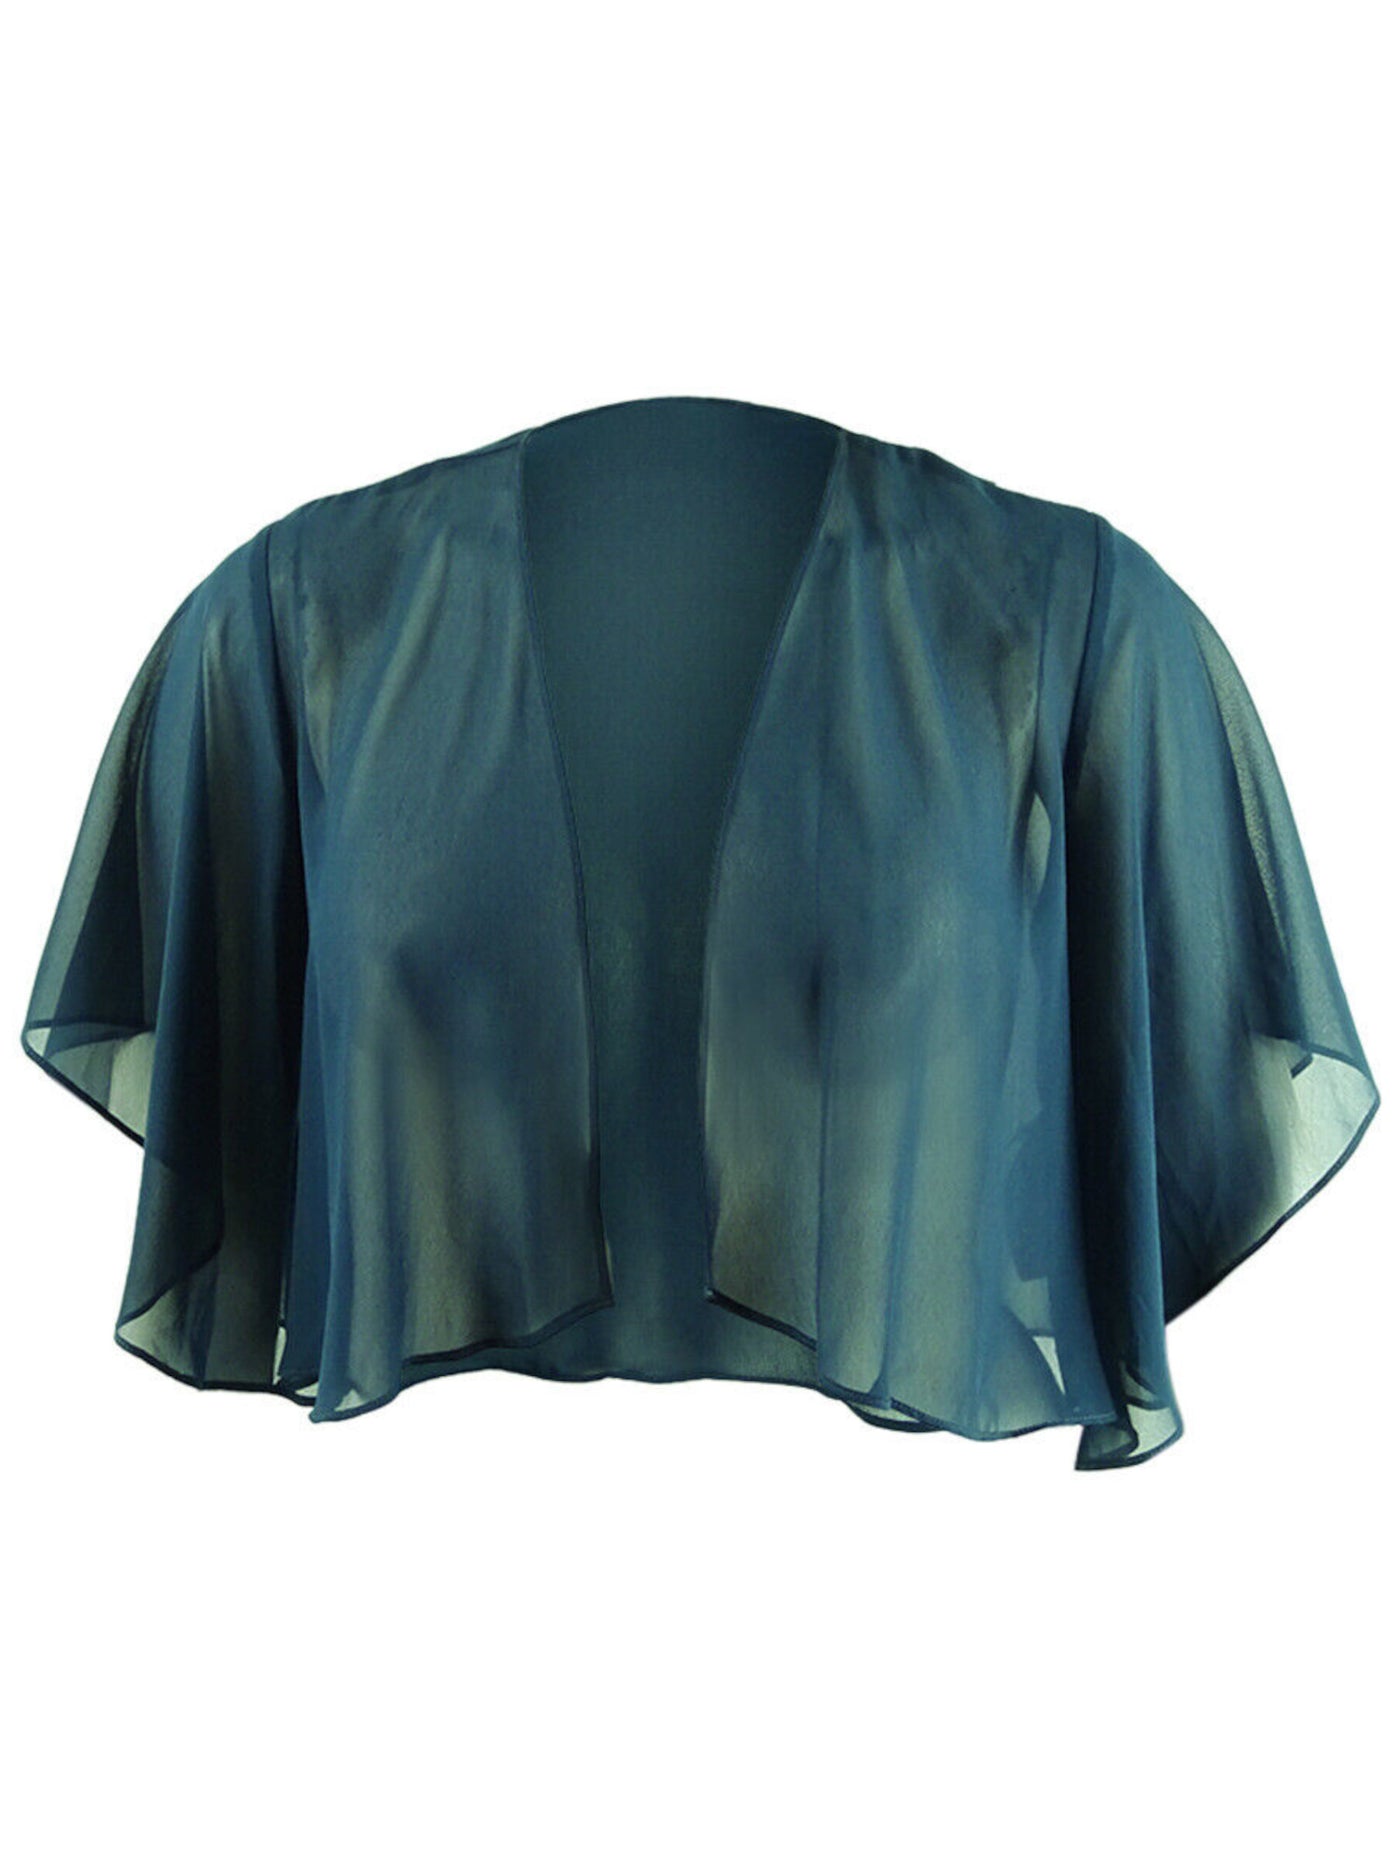 SLNY Womens Teal Sheer Capelet Flutter Sleeve Open Front Evening Waterfall Cardigan 8